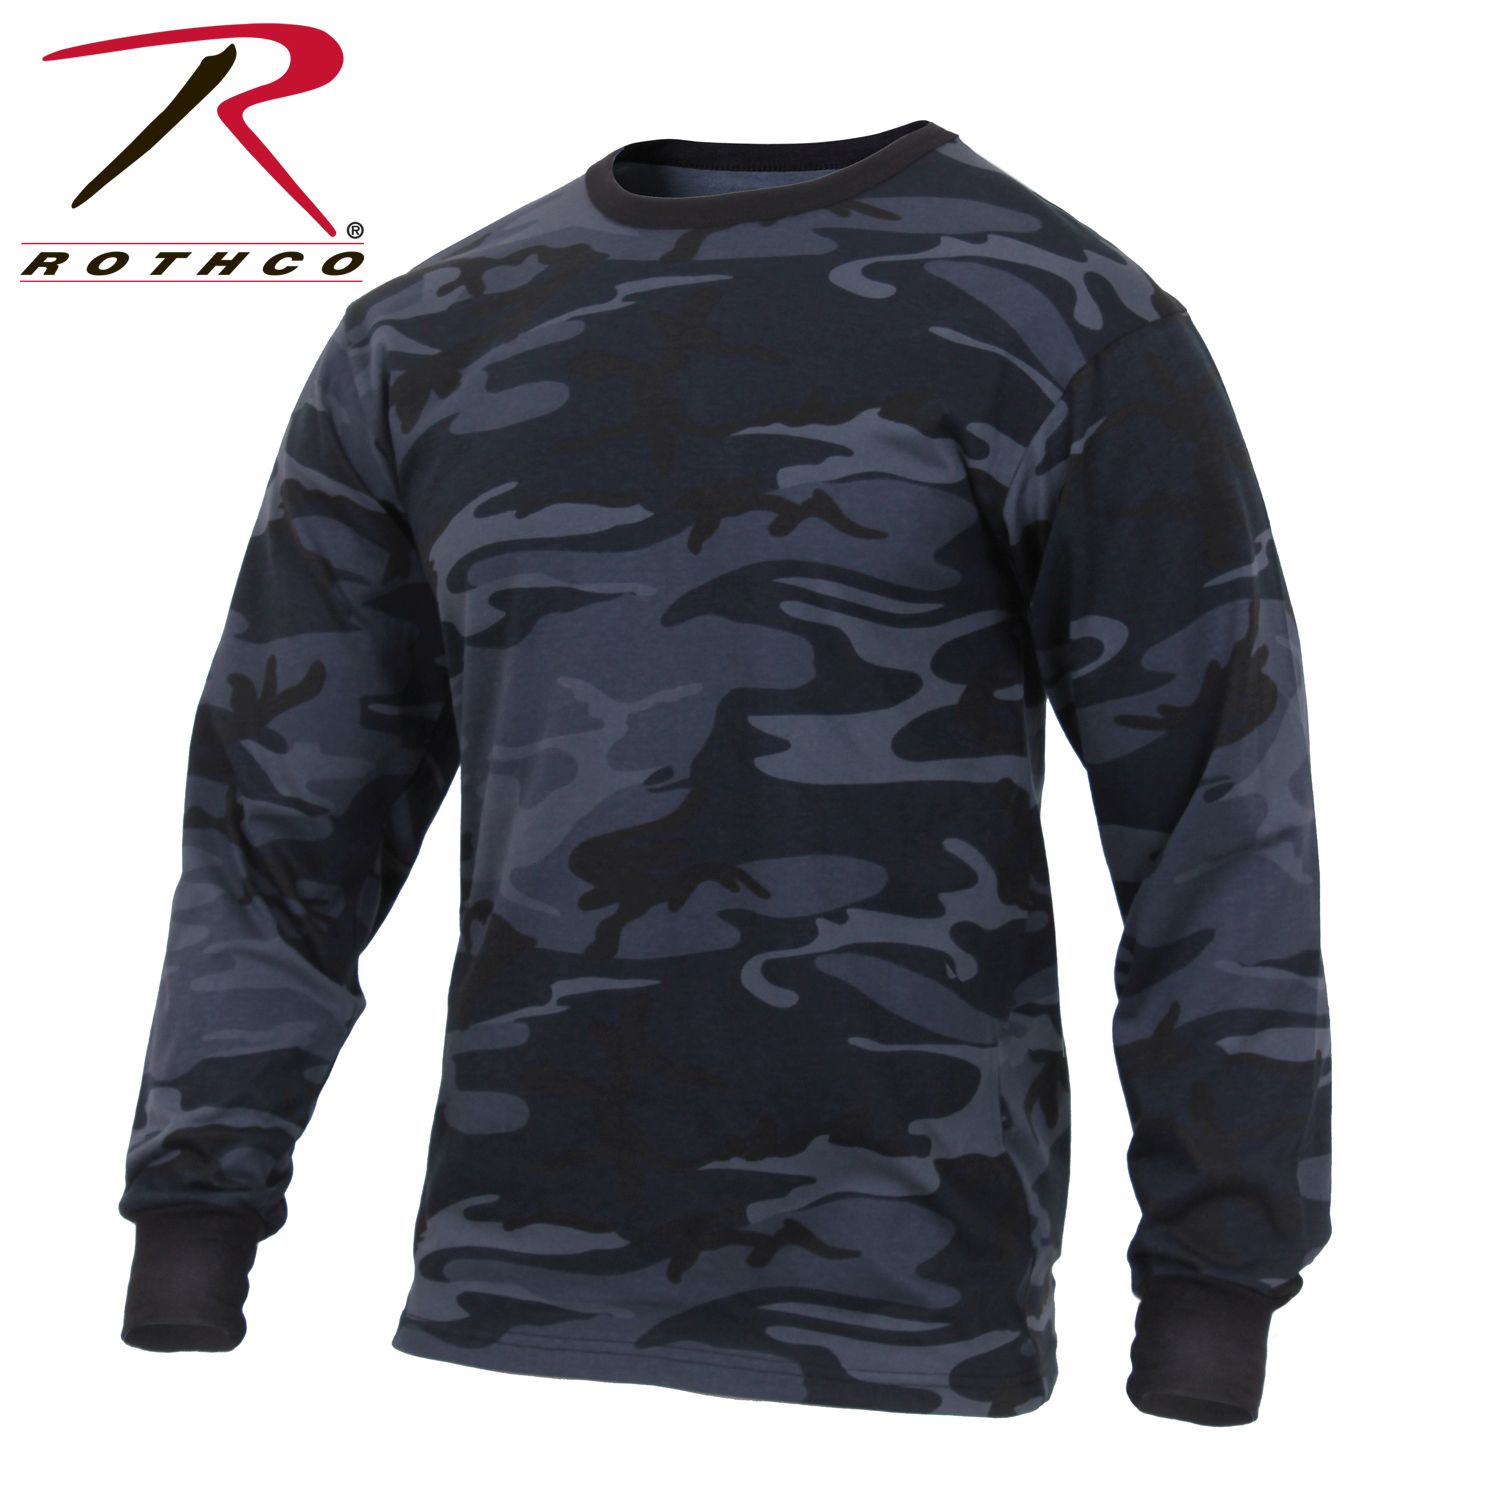 Shop for Camouflaged Full sleeved T-shirts Online at